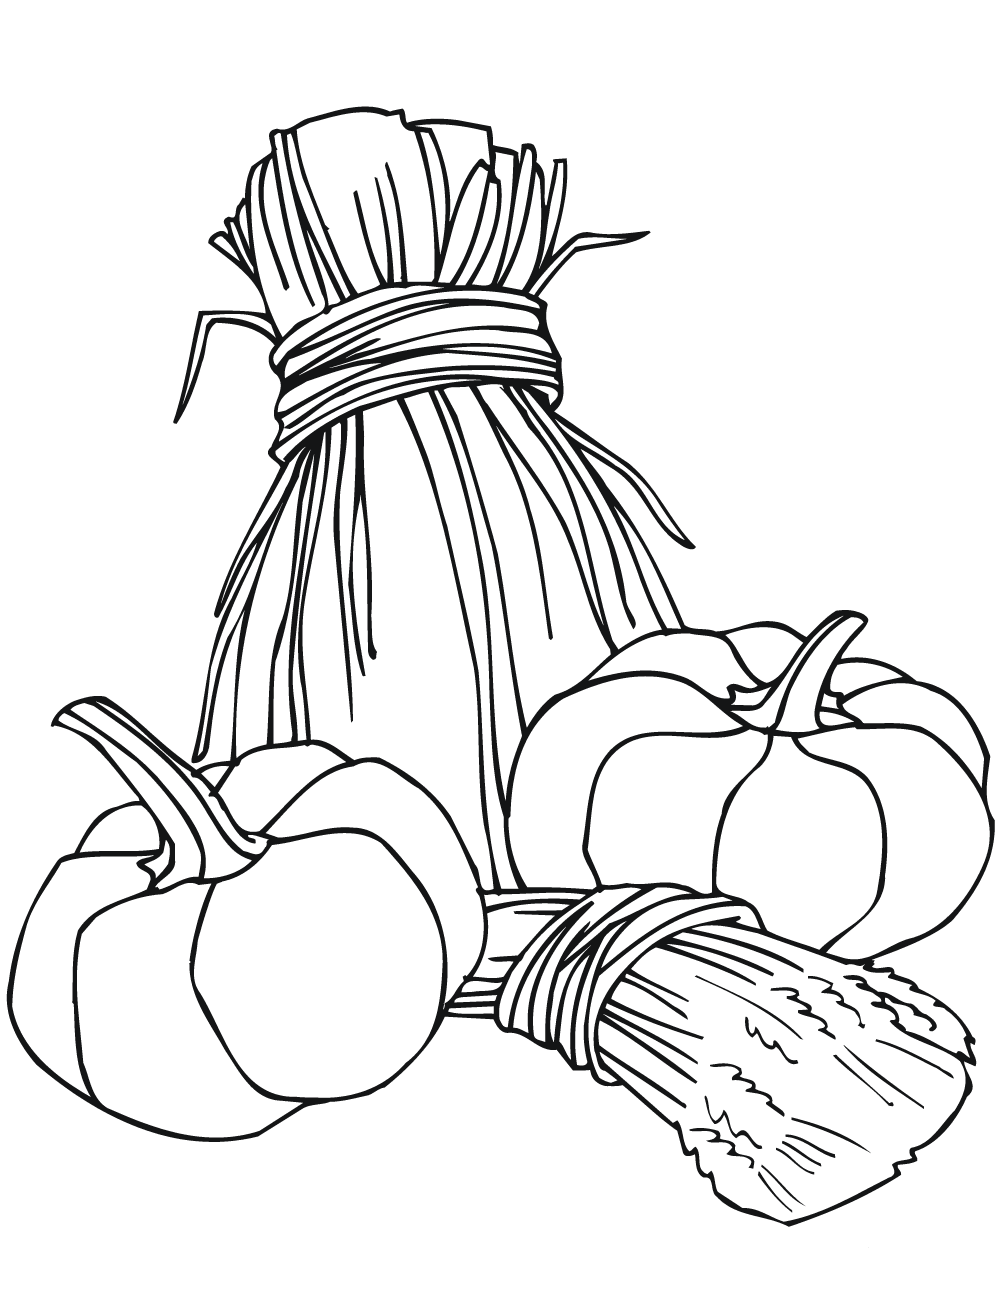 Pumpkins And Winter Sheafs Coloring Page